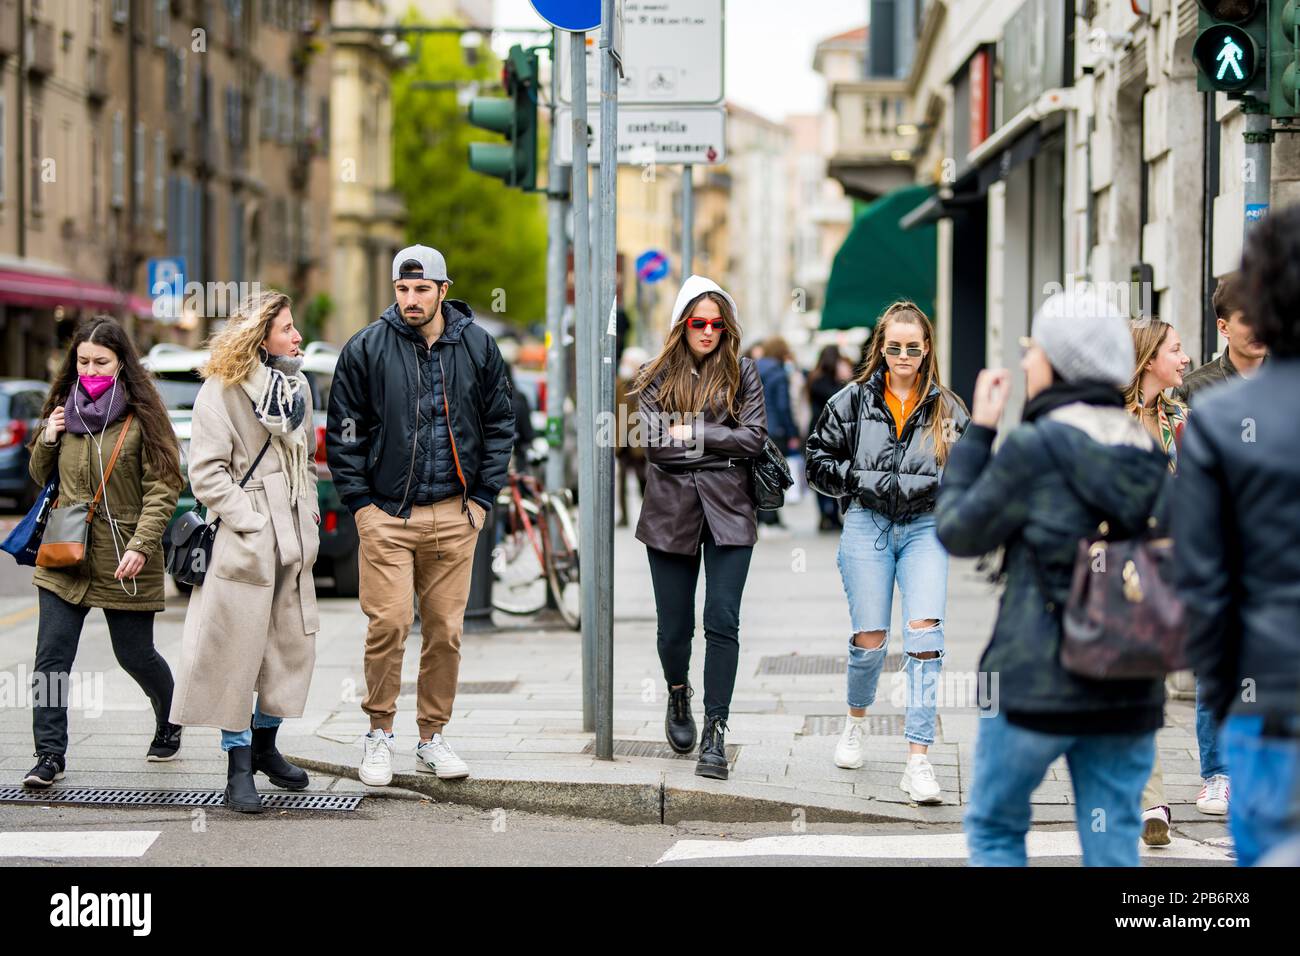 MILAN, ITALY - APRIL 2022: Tourists and locals walking down busy streets in the center of Milan, a metropolis in Italy's northern Lombardy region. Mil Stock Photo